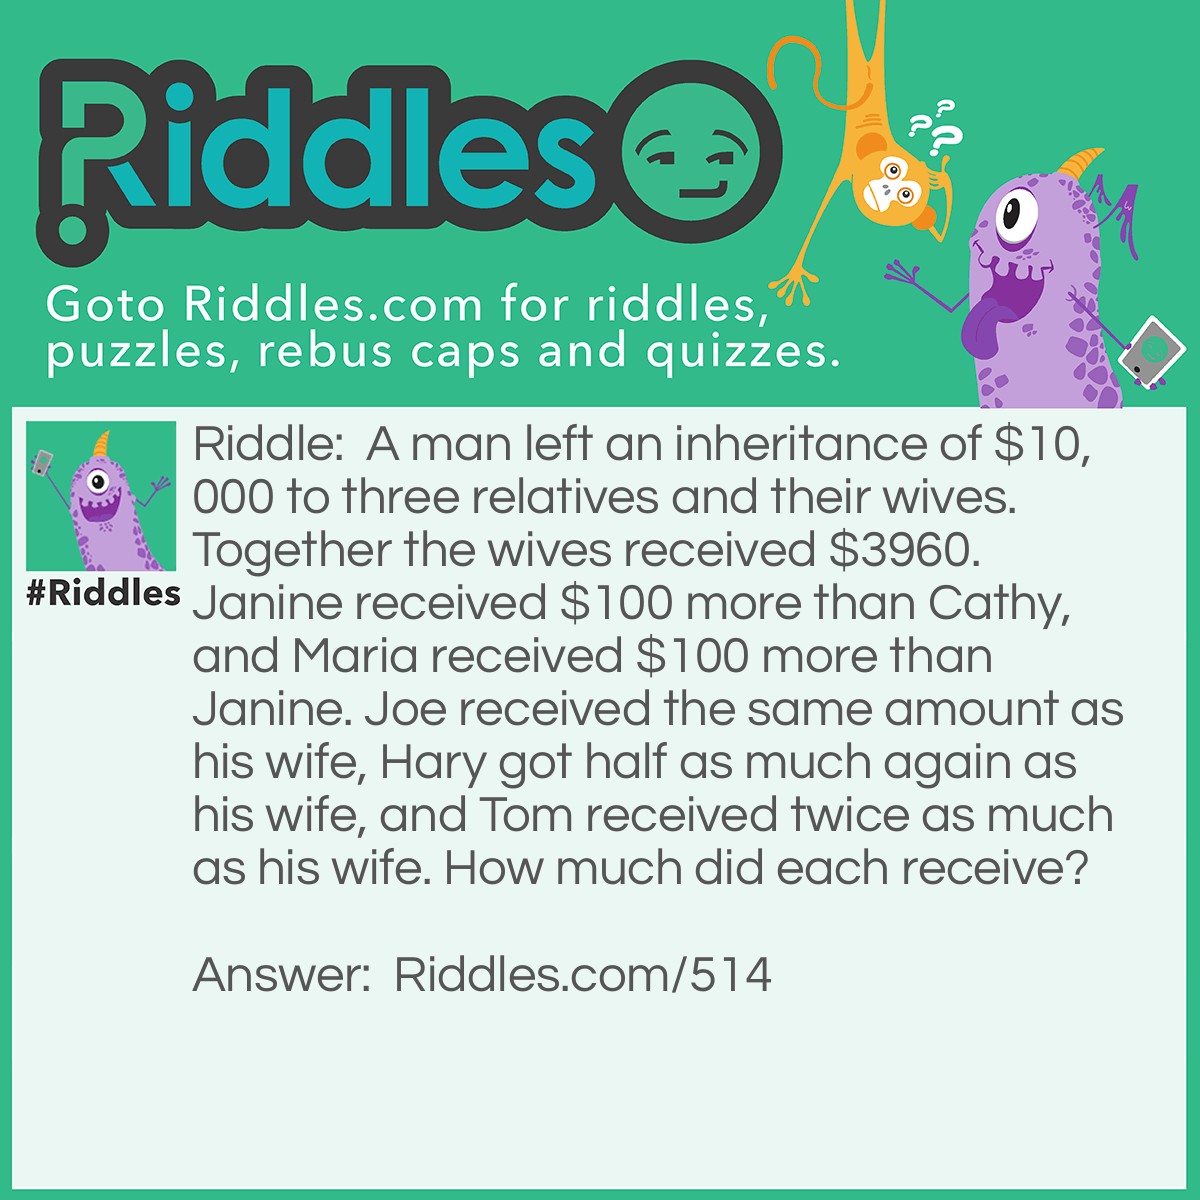 Riddle: A man left an inheritance of $10,000 to three relatives and their wives. Together the wives received $3960. Janine received $100 more than Cathy, and Maria received $100 more than Janine. Joe received the same amount as his wife, Hary got half as much again as his wife, and Tom received twice as much as his wife. How much did each receive? Answer: Carthy, Janine and Maria received $1220, $1320, and $1420 respectively. Joe received the same as his wife Carol, $1220. Hary received half again what his wife Janine did, $1980. Tommy got twice as much as his wife Maria, $2840.